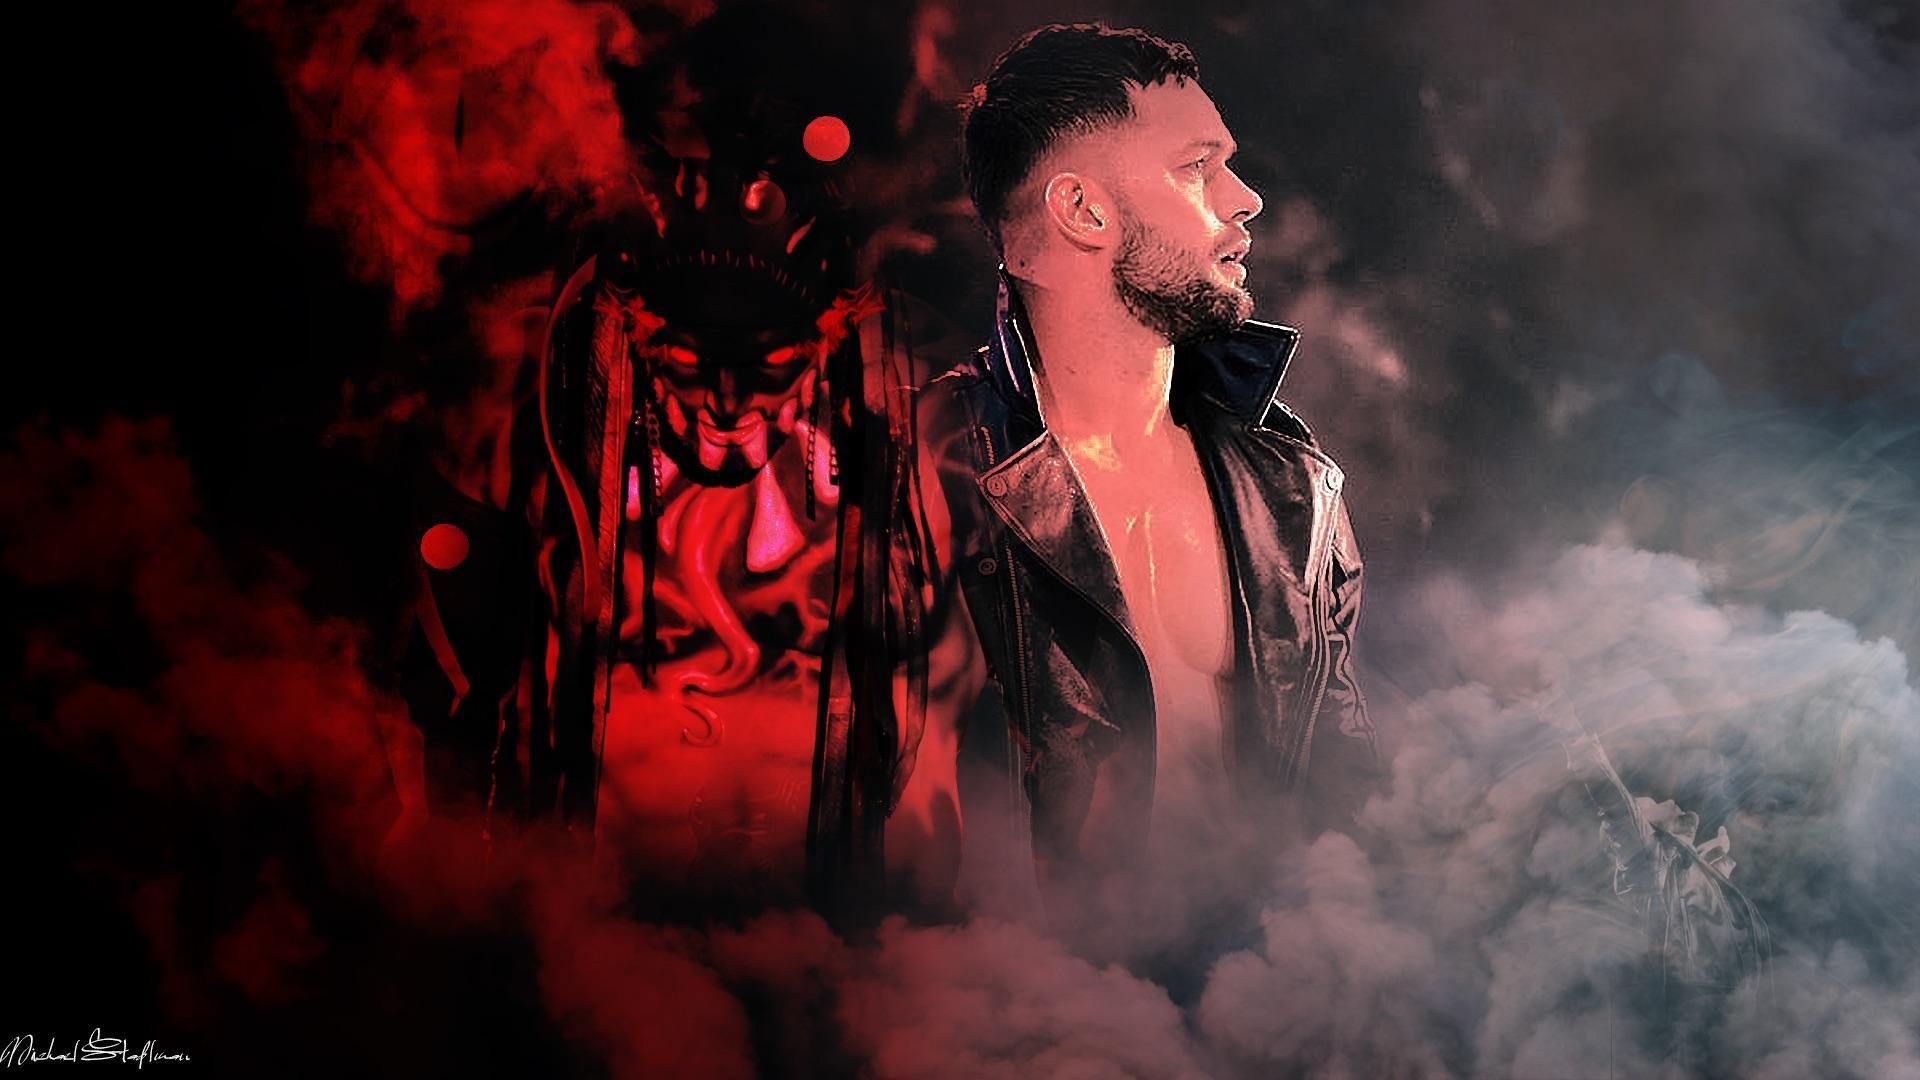 Finn Balor “Two Sides to Every Demon” Wallpaper I've been working